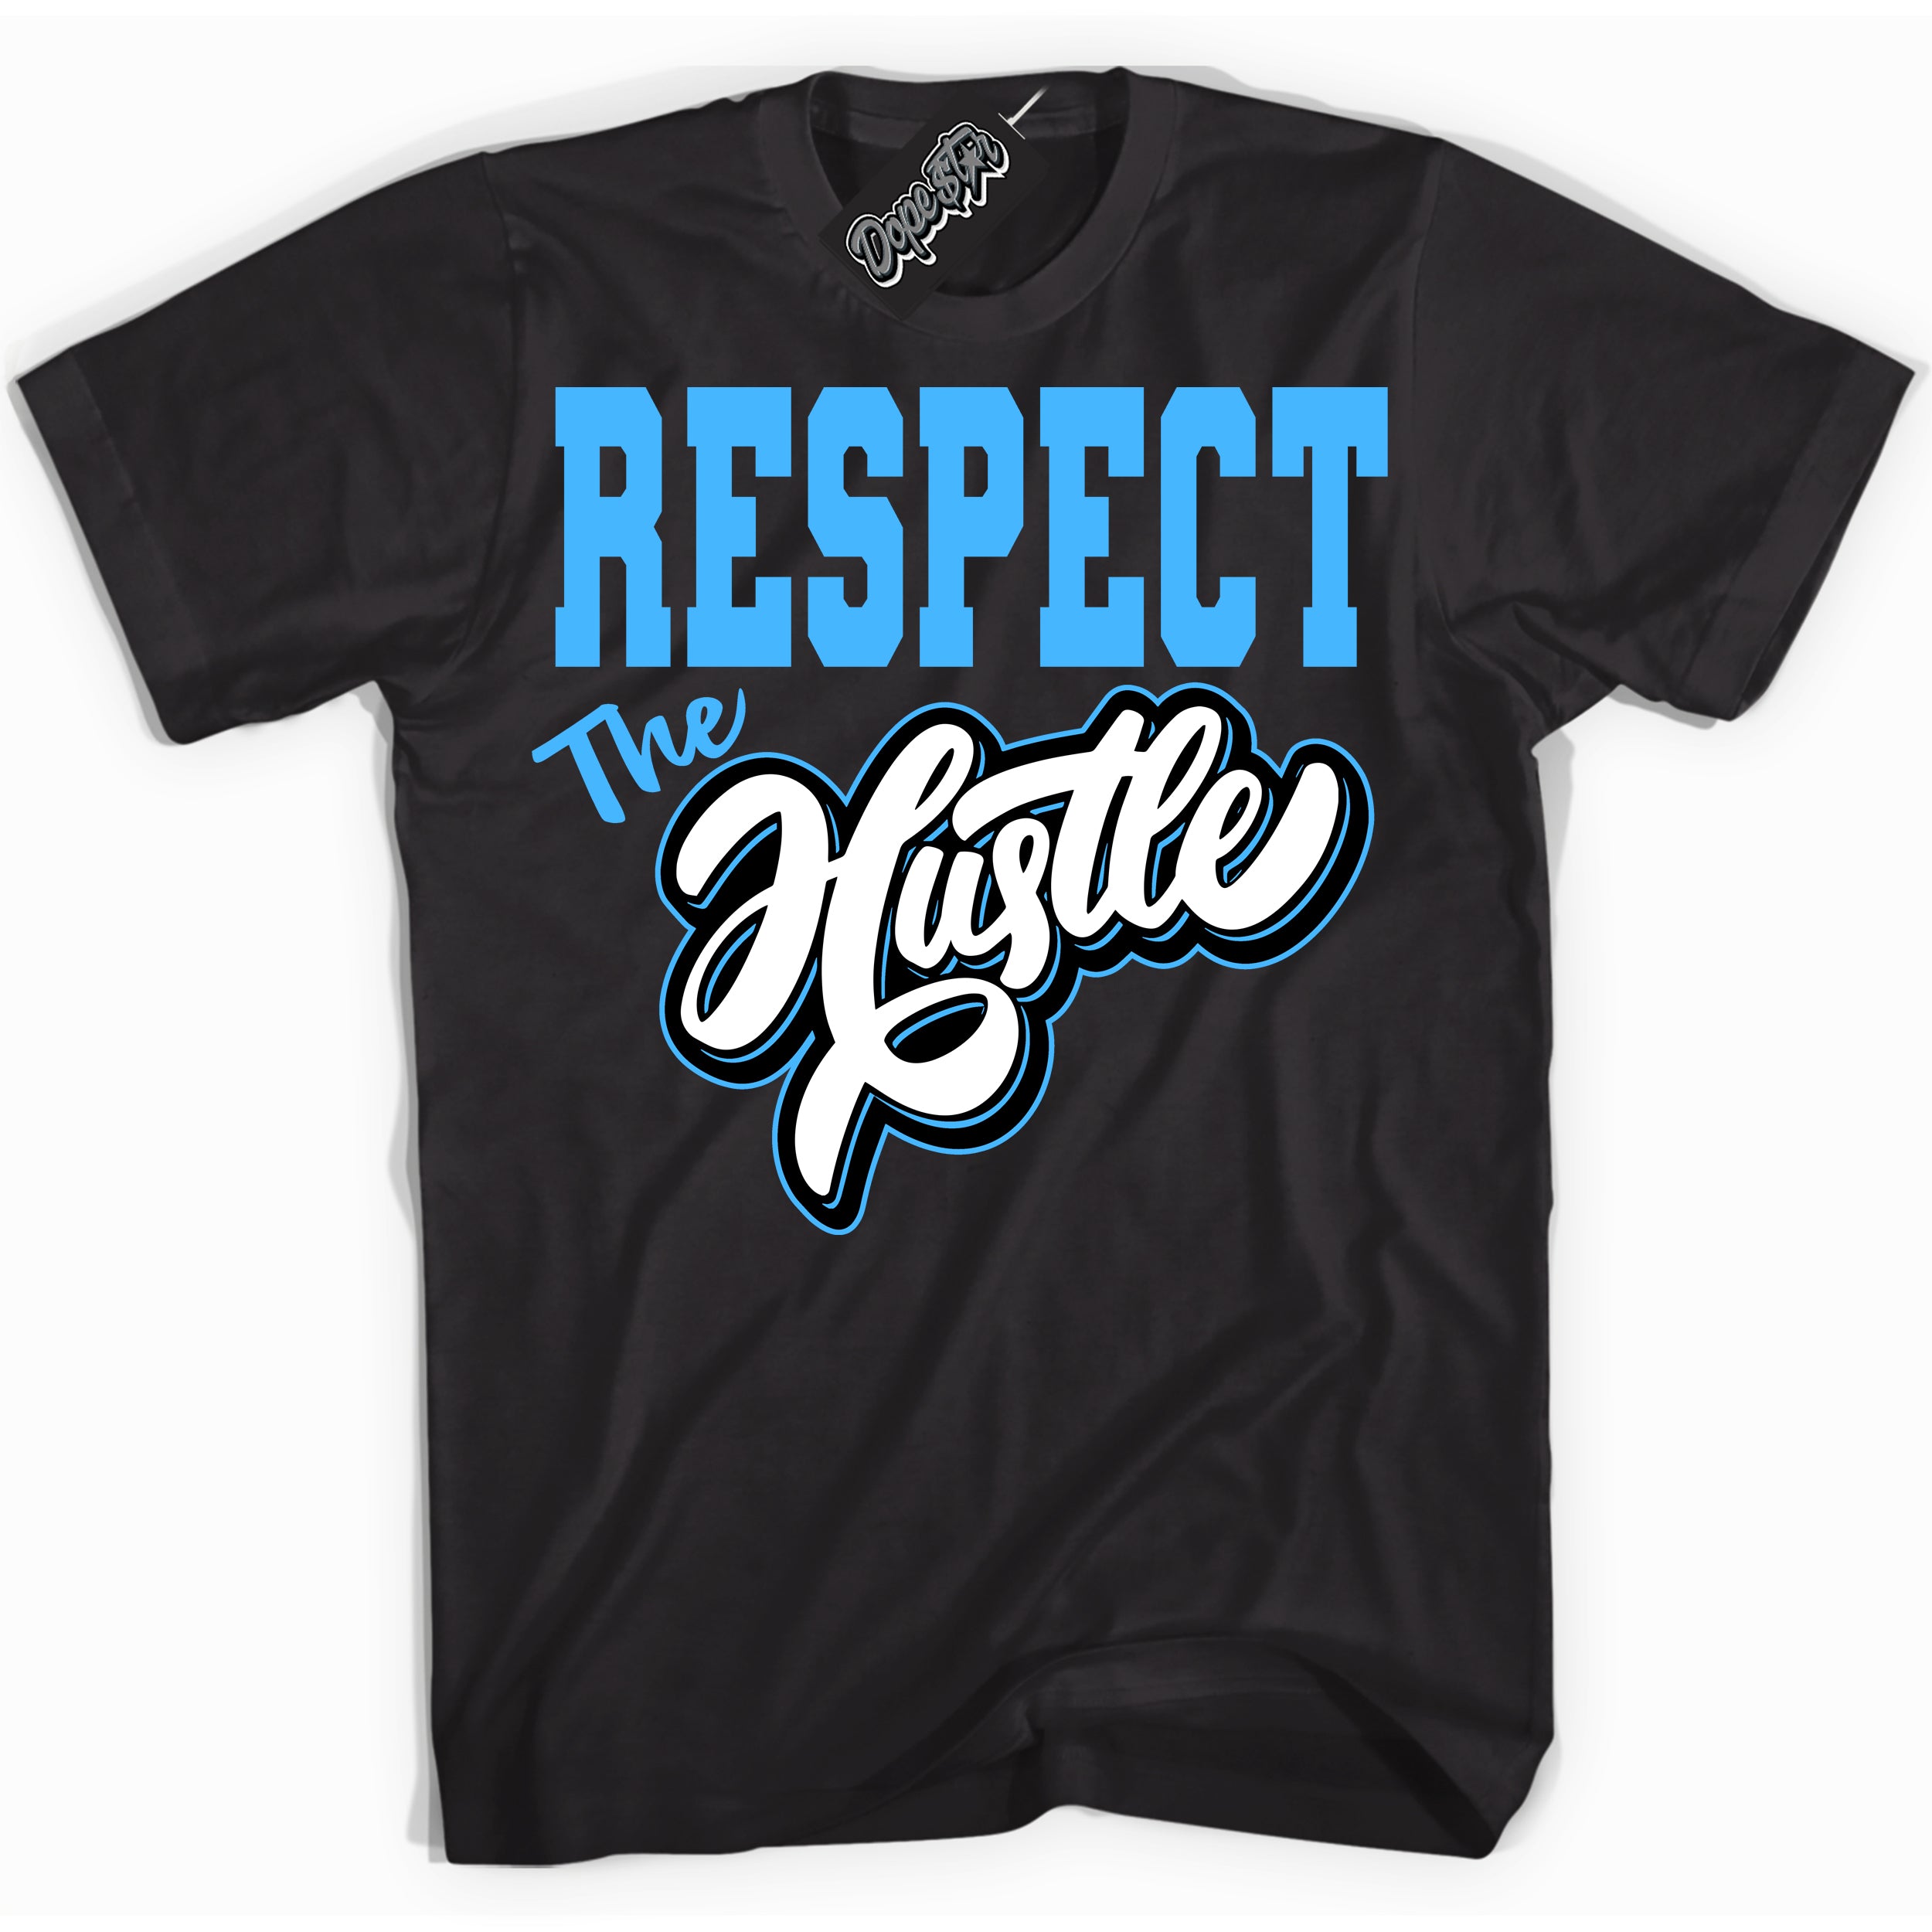 Cool Black graphic tee with “ Respect The Hustle ” design, that perfectly matches Powder Blue 9s sneakers 